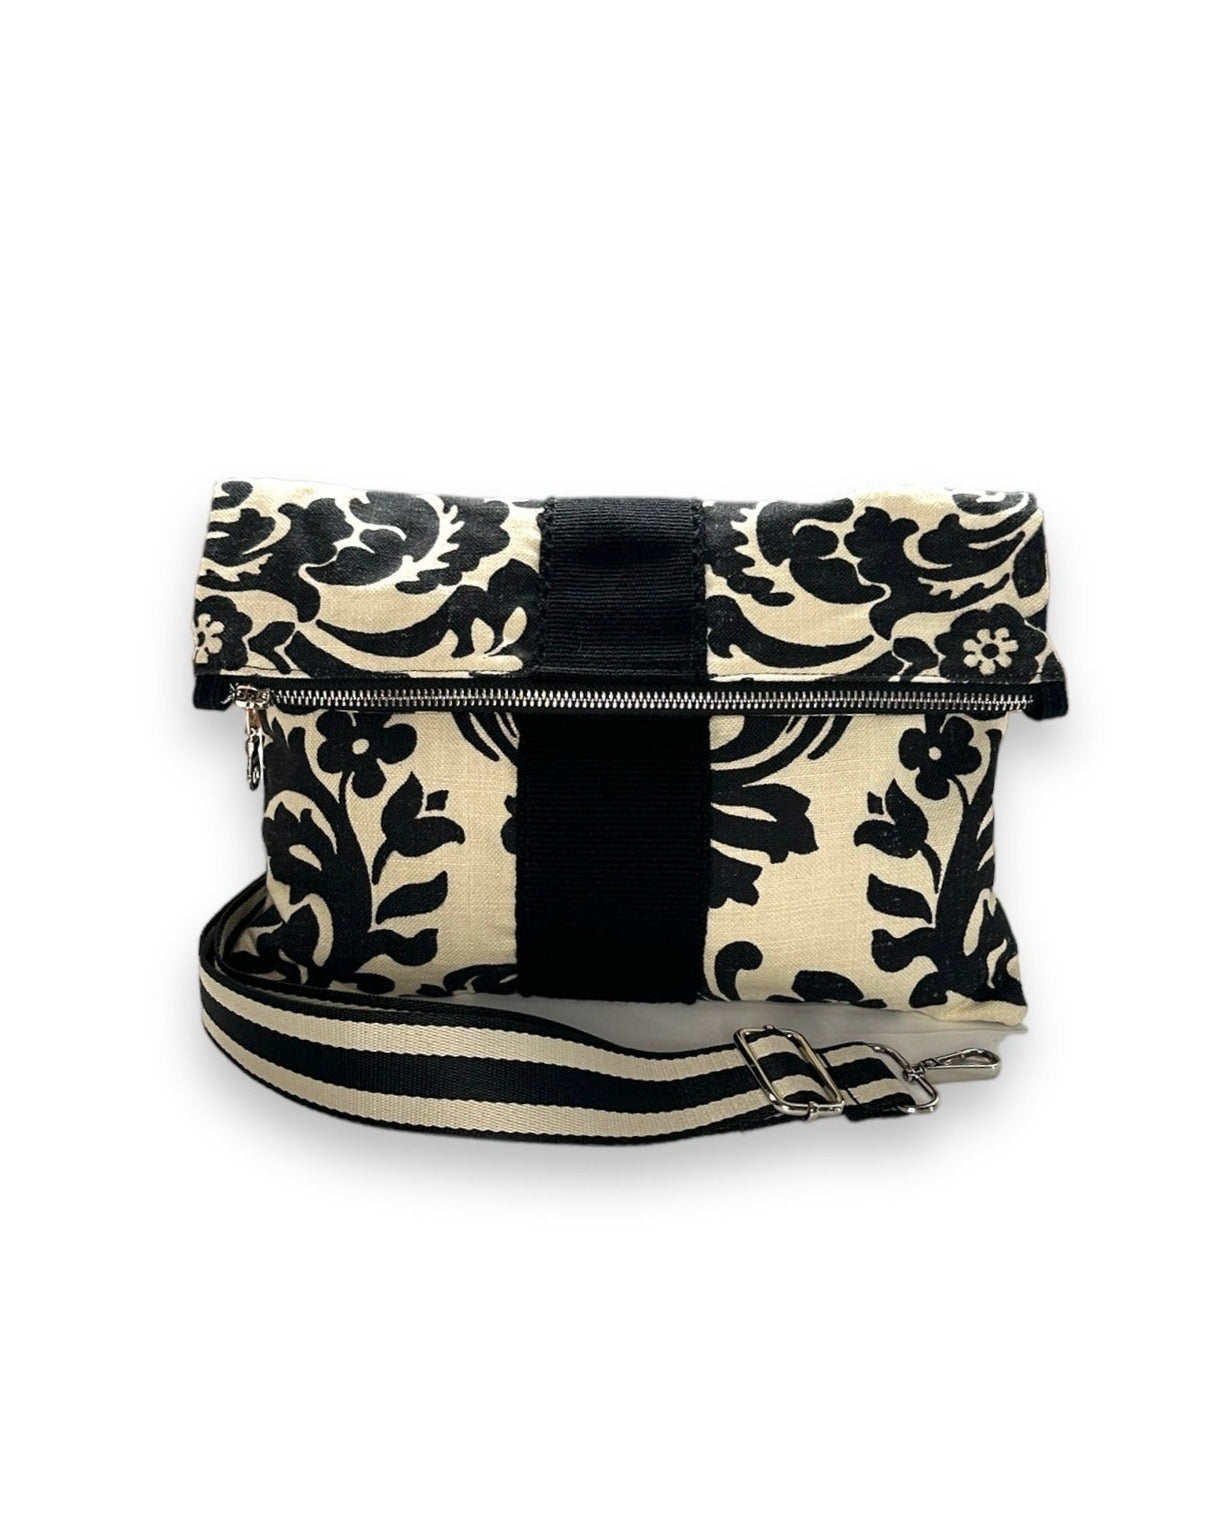 Foldover clutch that can be worn 3 ways, folded over, longwise and as a clutch.